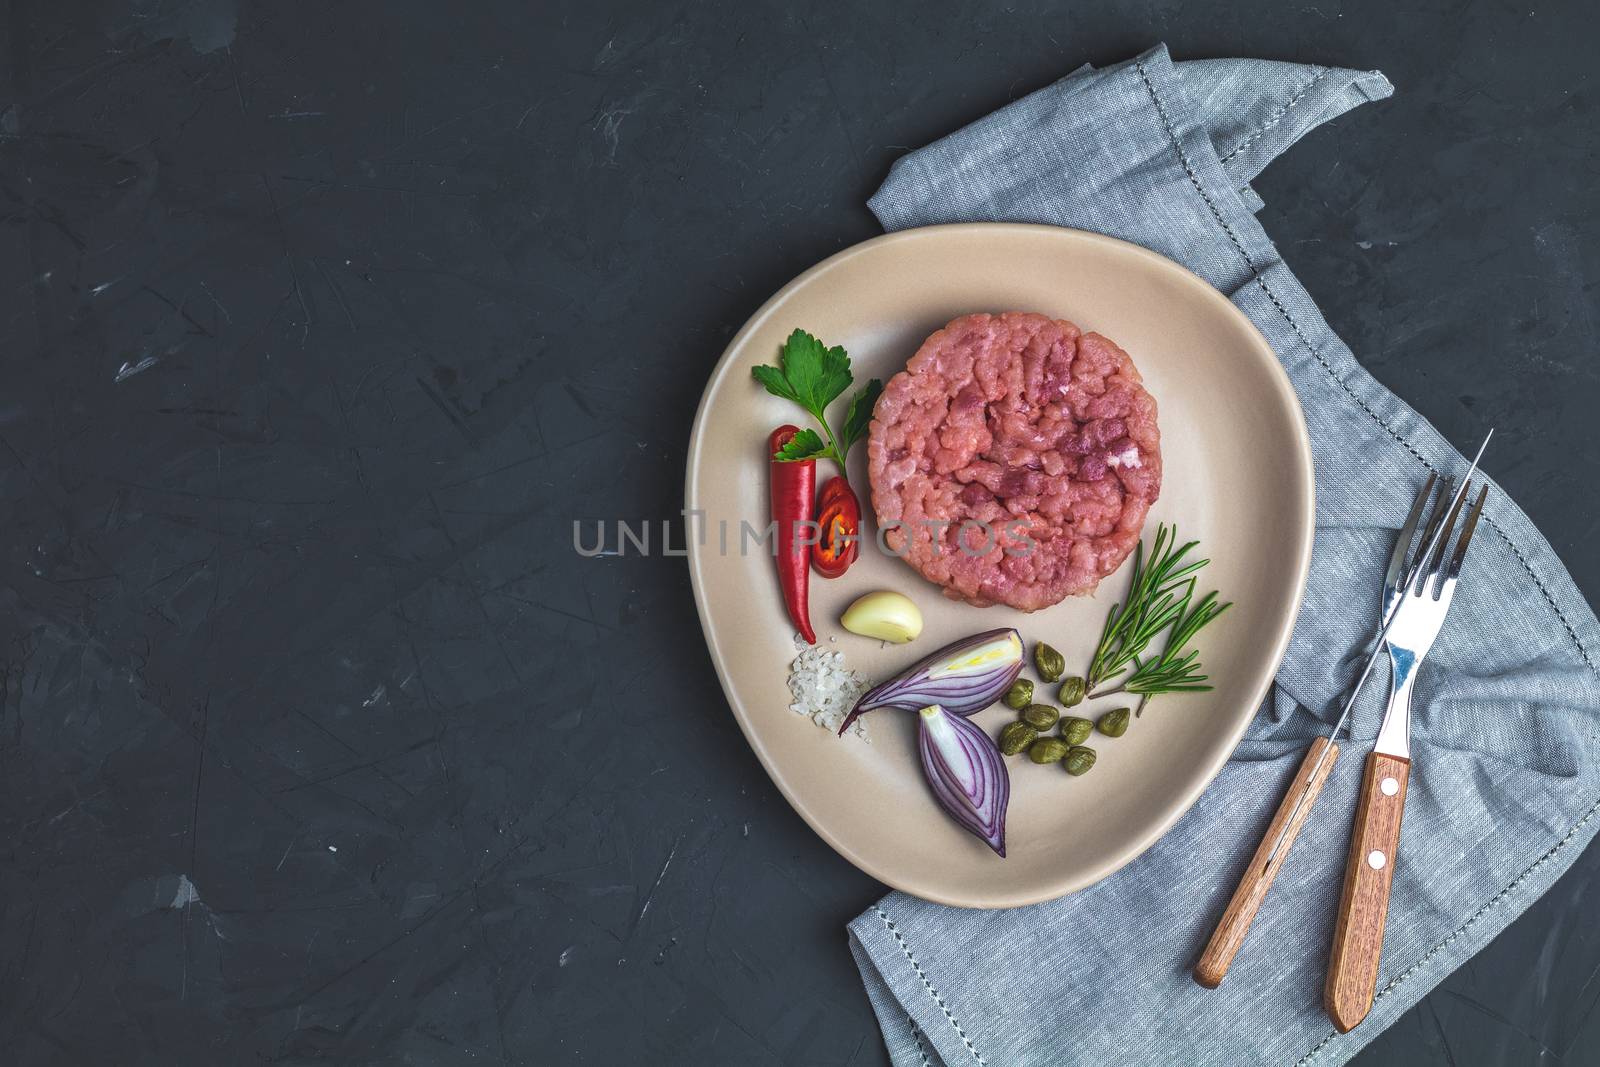 Delicious steak tartare and ingredients on ceramic plate, set of cutlery knife, fork on black stone concrete textured surface background. Copy space background, top view flat lay.